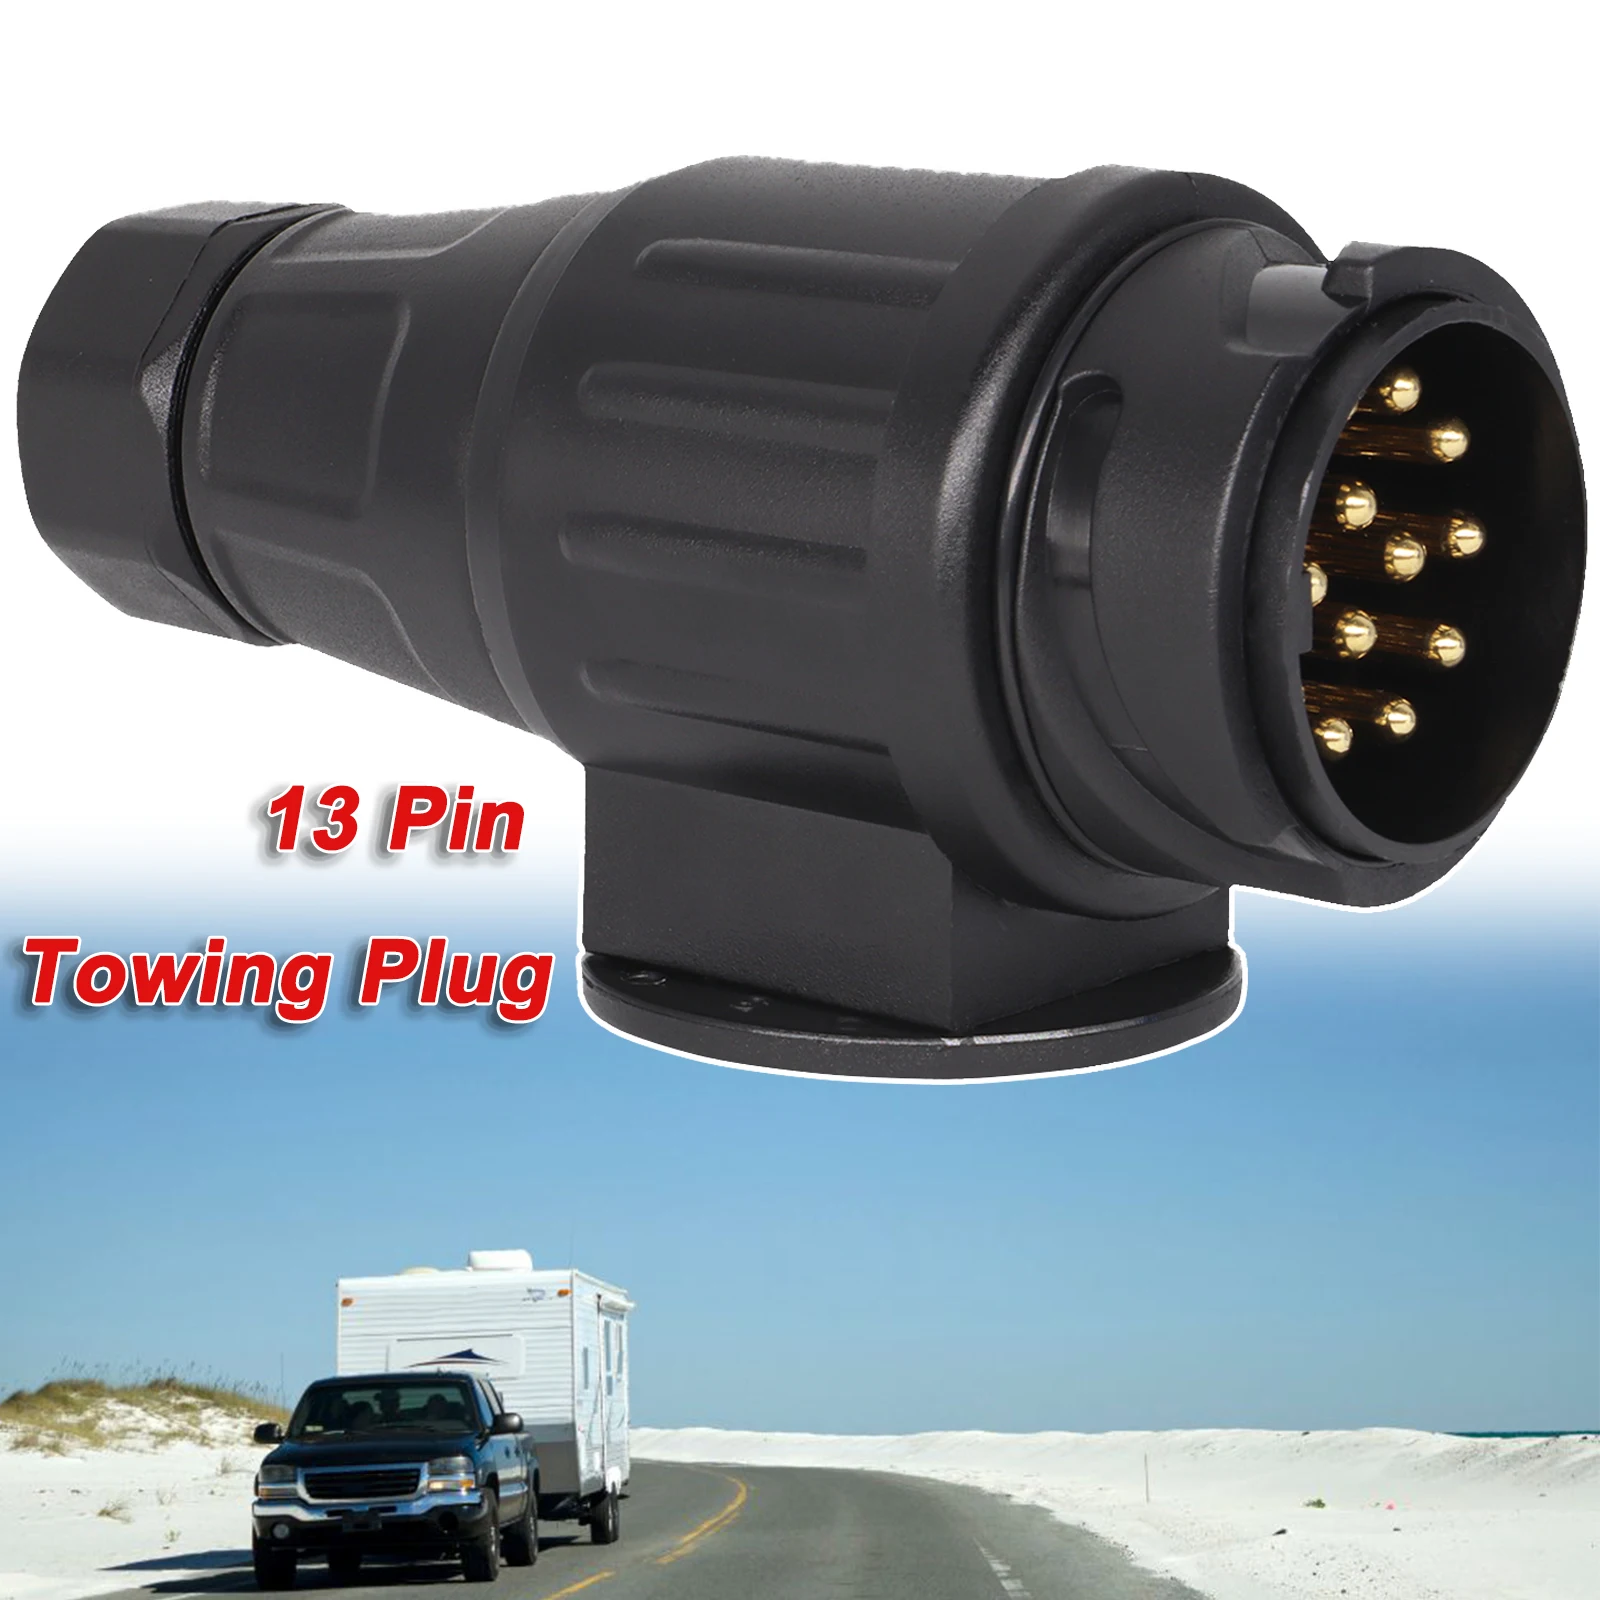 12V 13 Pin Trailer Plug Durable 13 Pole Electrical Caravan Wiring Connector Towing Bar Socket Adapter Car Truck RV Accessories durable new cigarette lighter plugs connector set socket w fuses 10a 12v 24v 5pcs accessories indicator kit